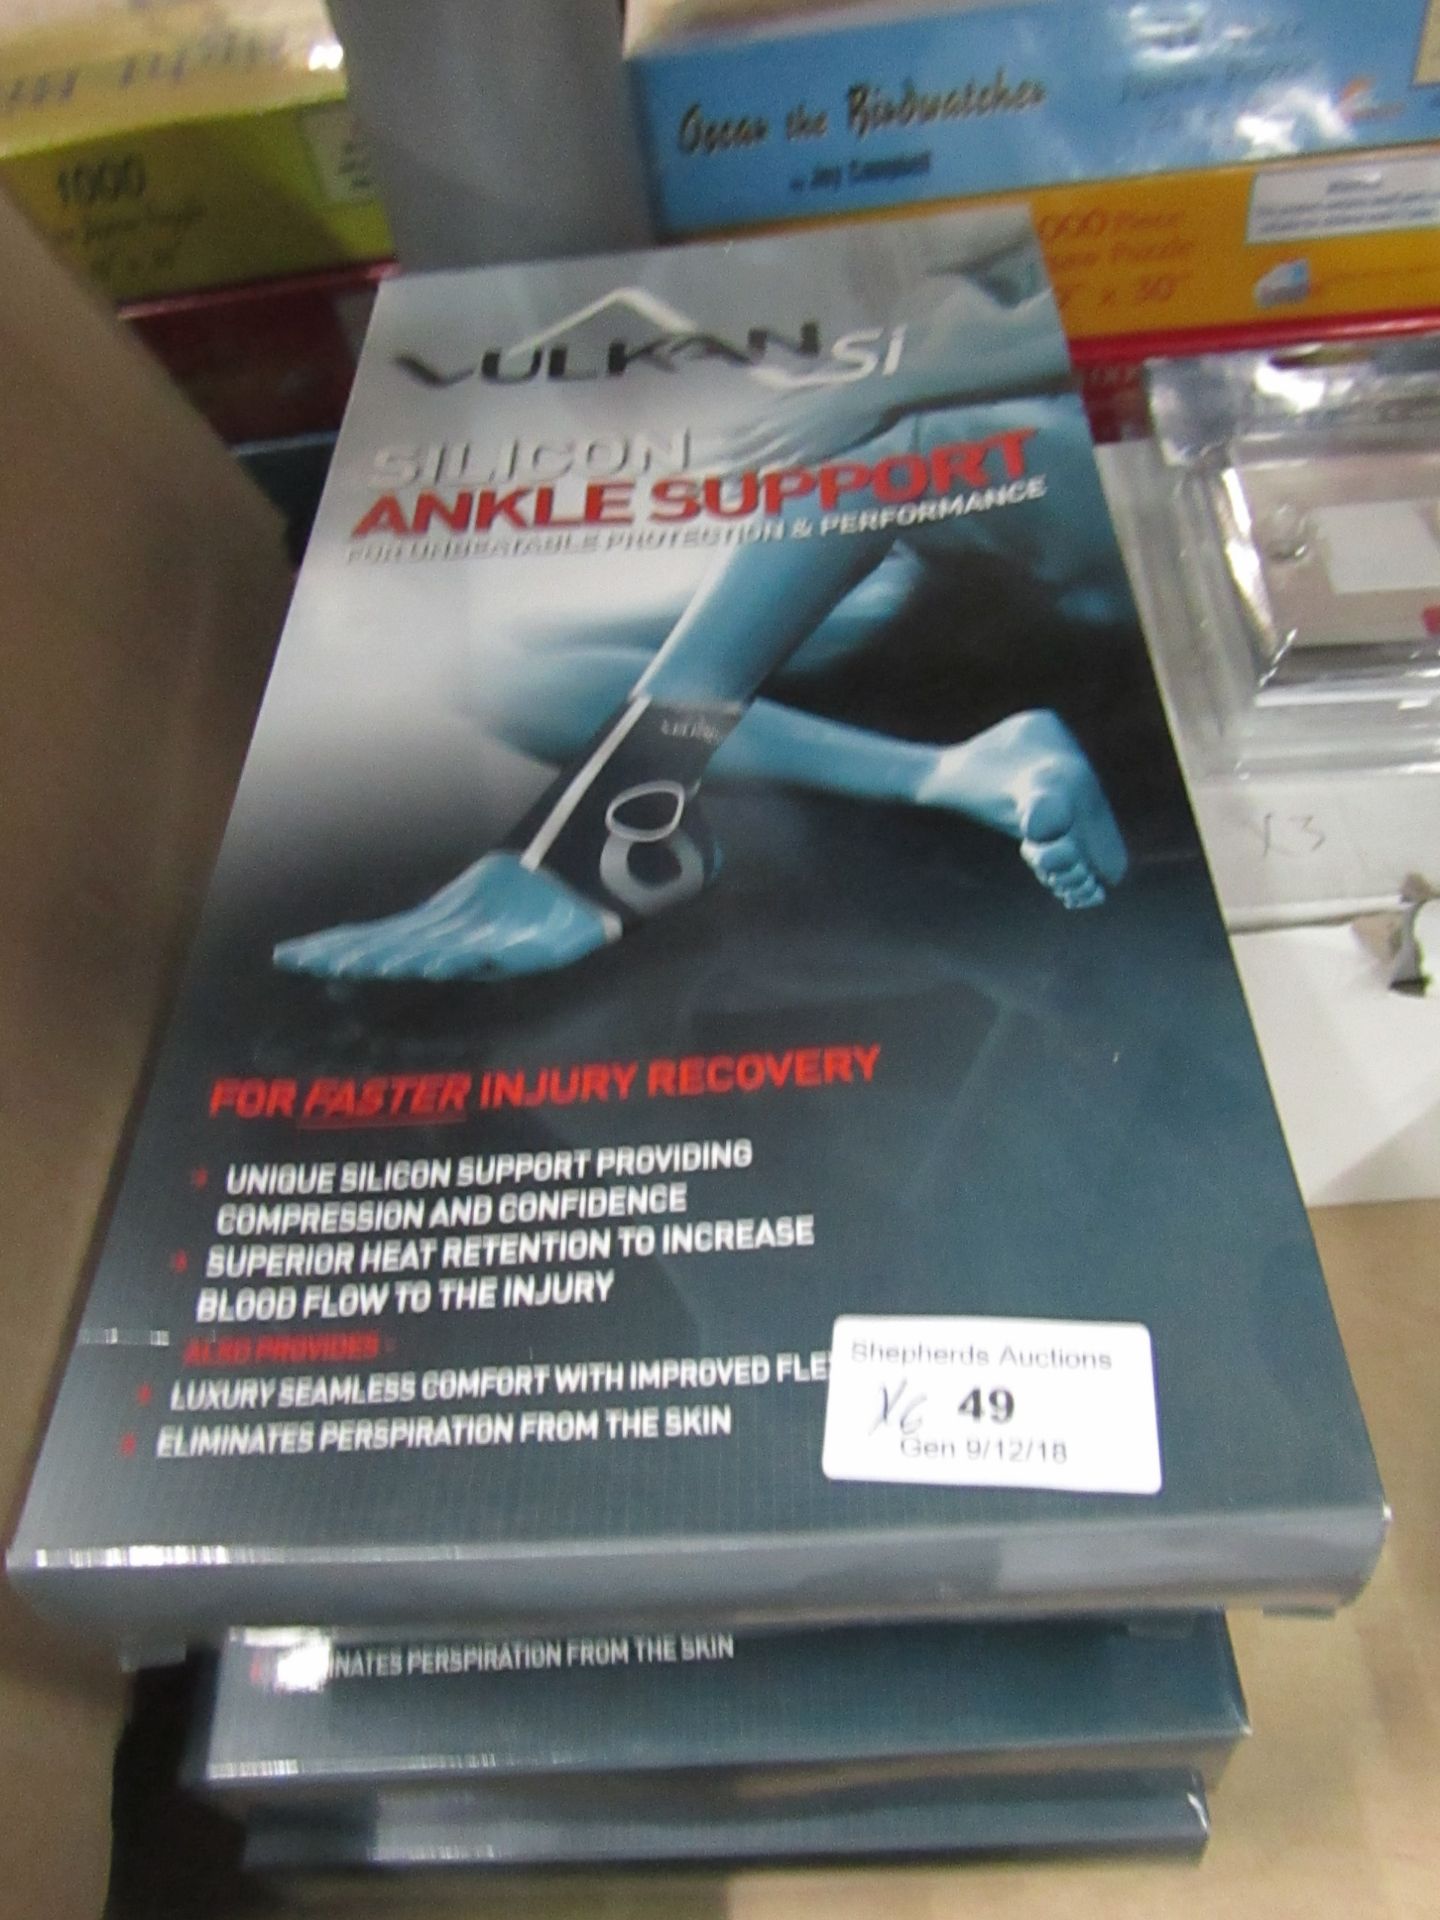 6x Vulkan Si silicon ankle supports (large), new